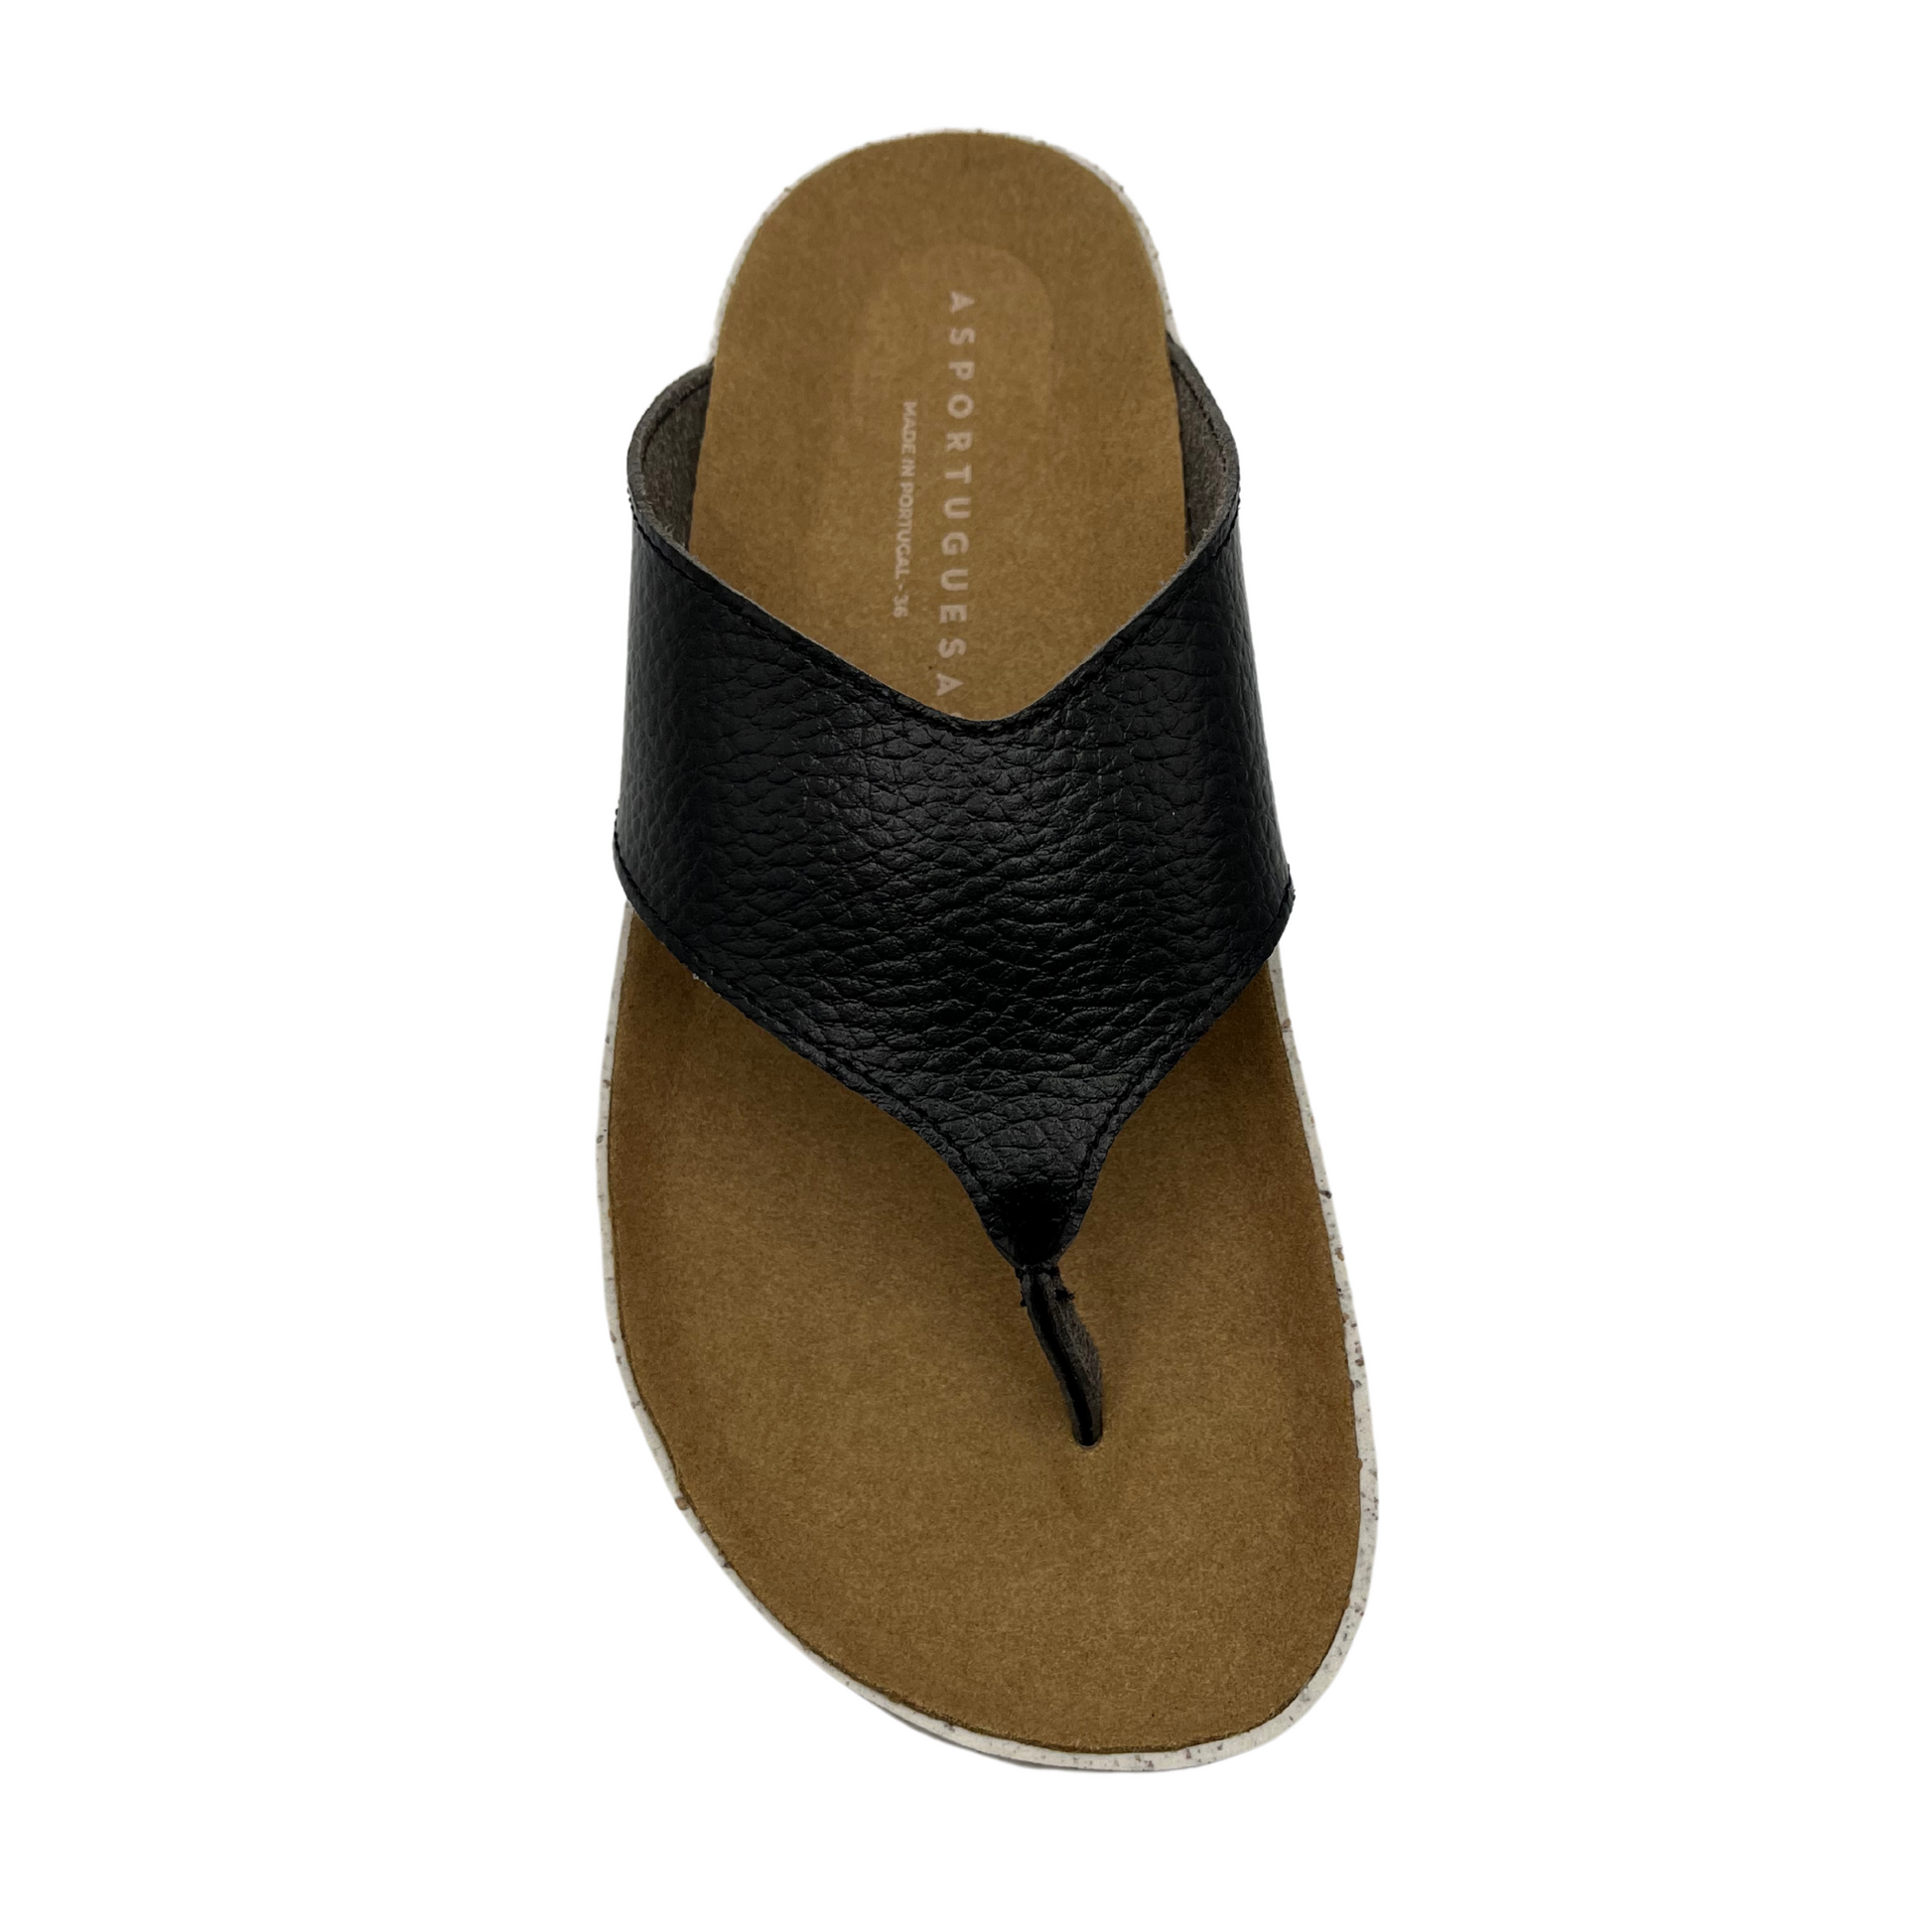 Top view of black strapped thong sandal with brown contoured footbed and white speckled outsole